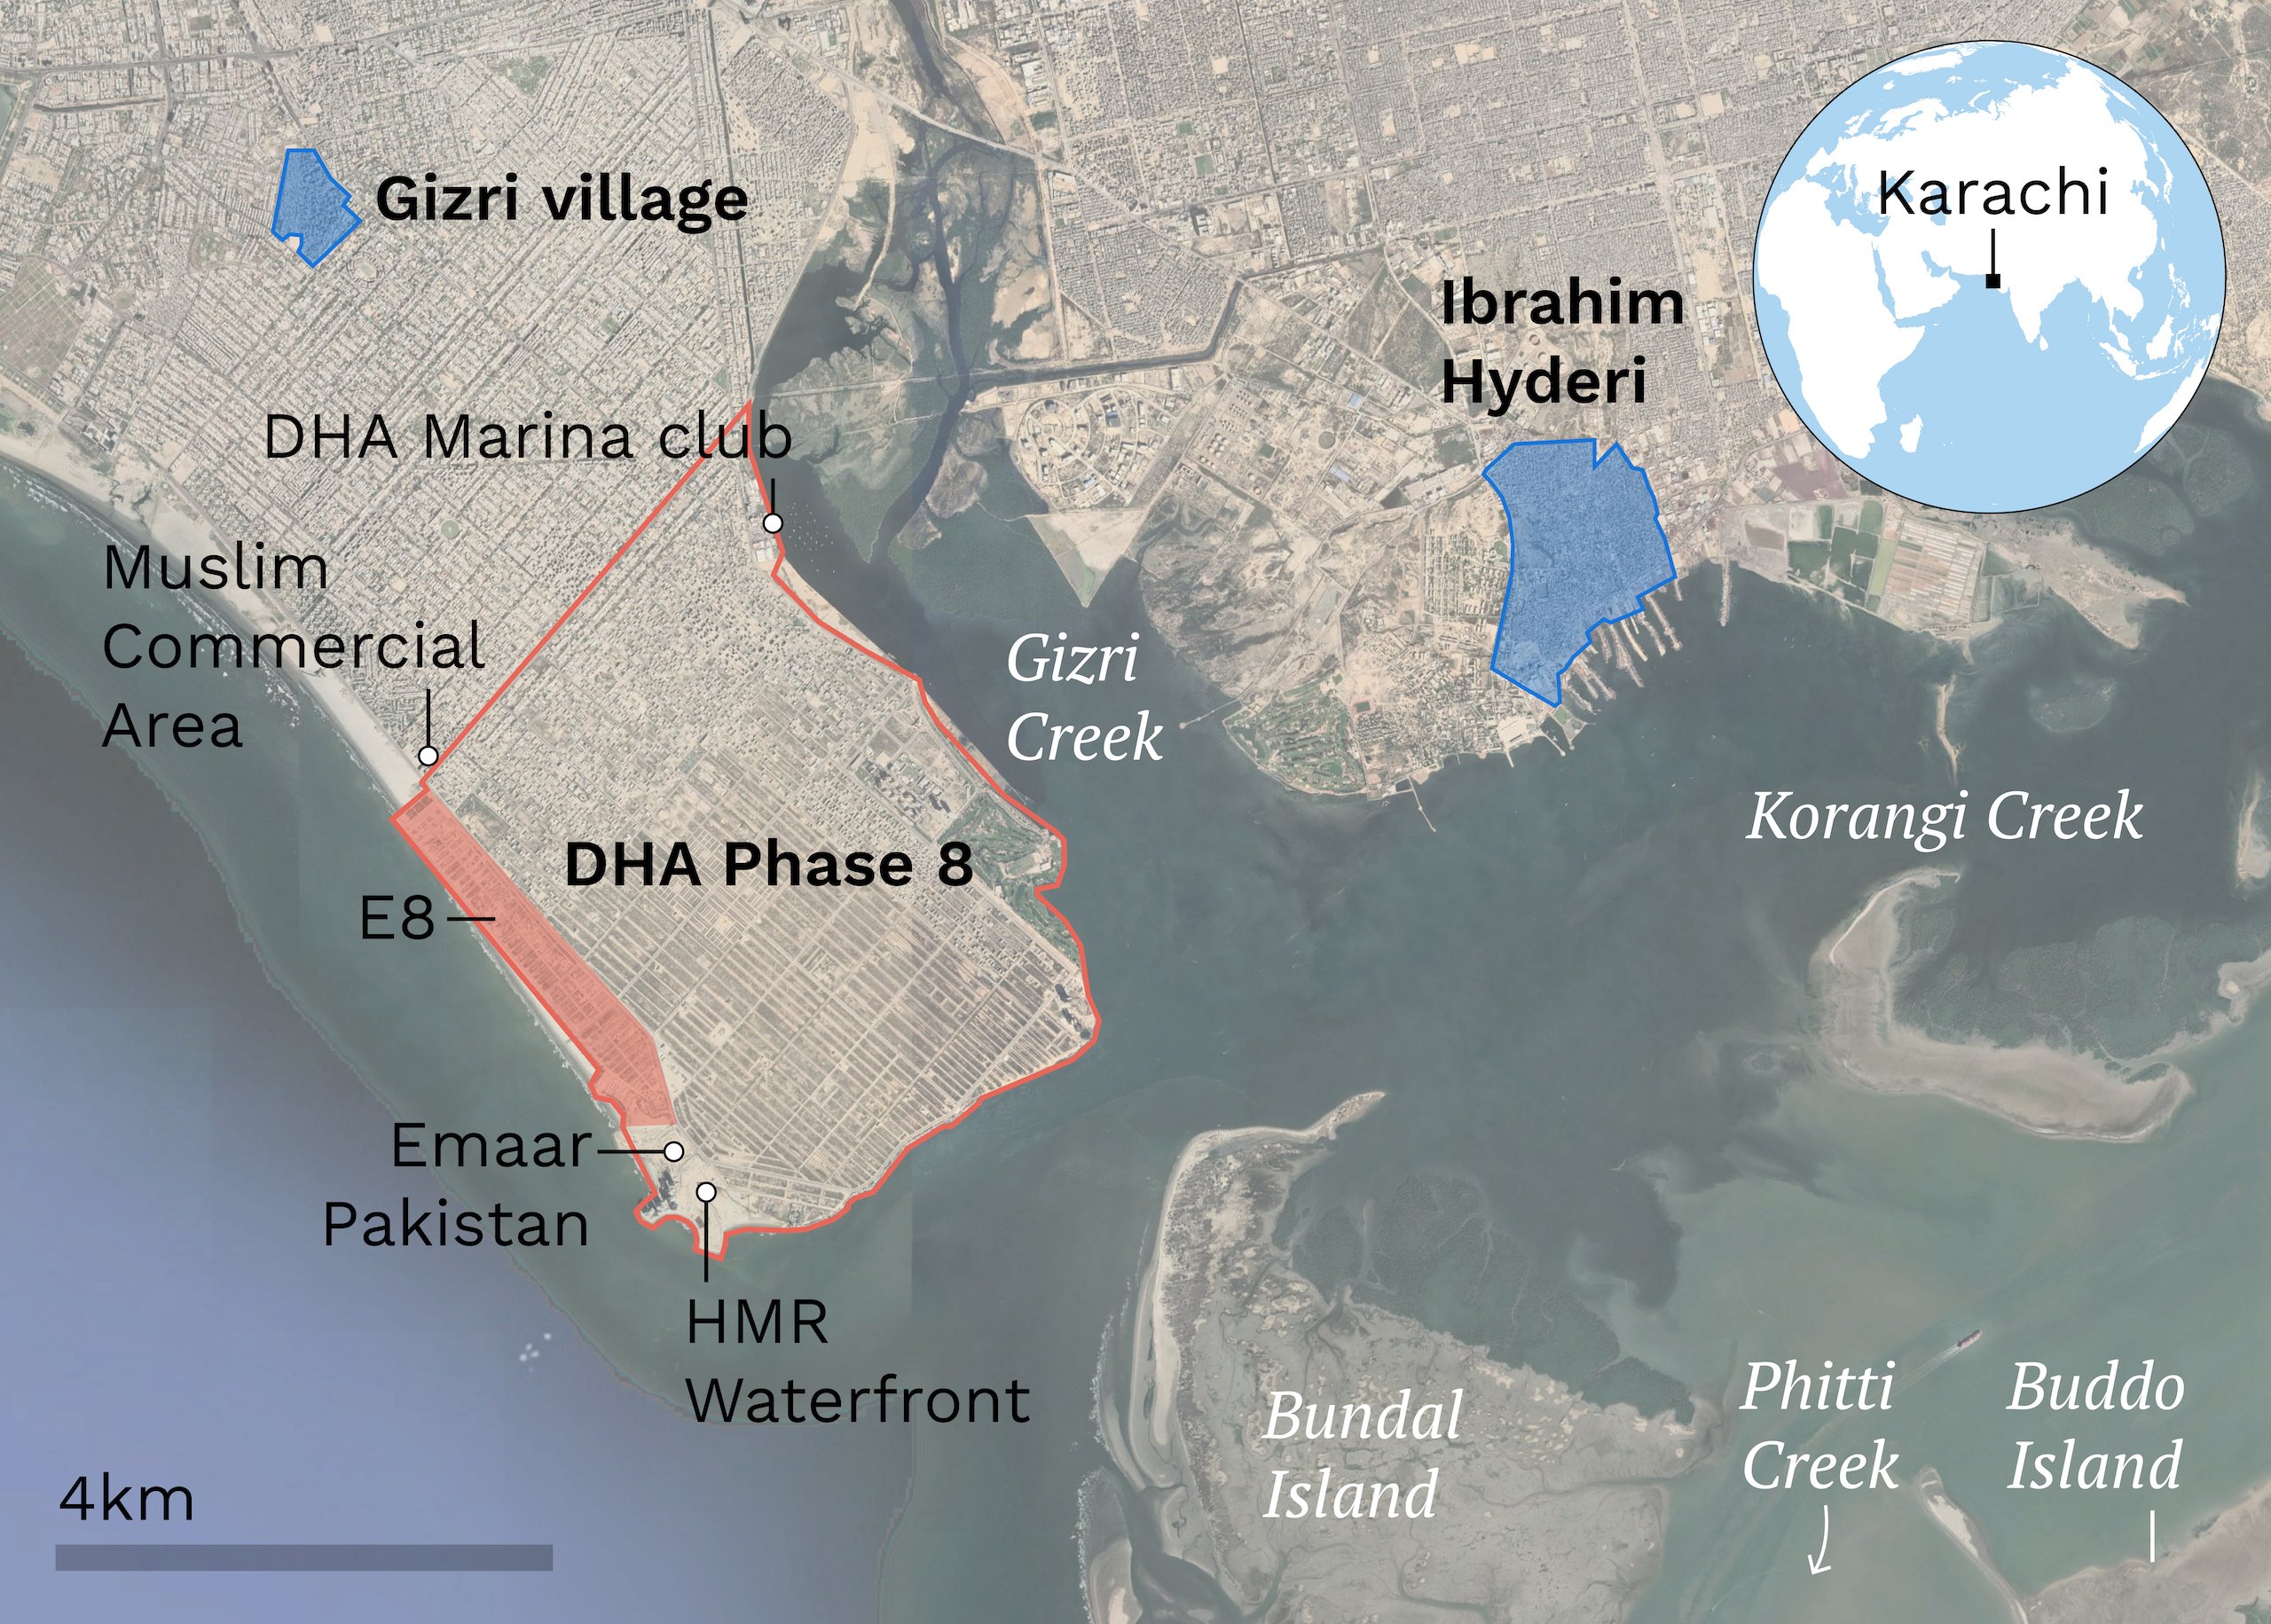 Map showing the huge area covered by the DHA’s Phase 8 development, bounded by Gizri Creek and the Arabian Sea